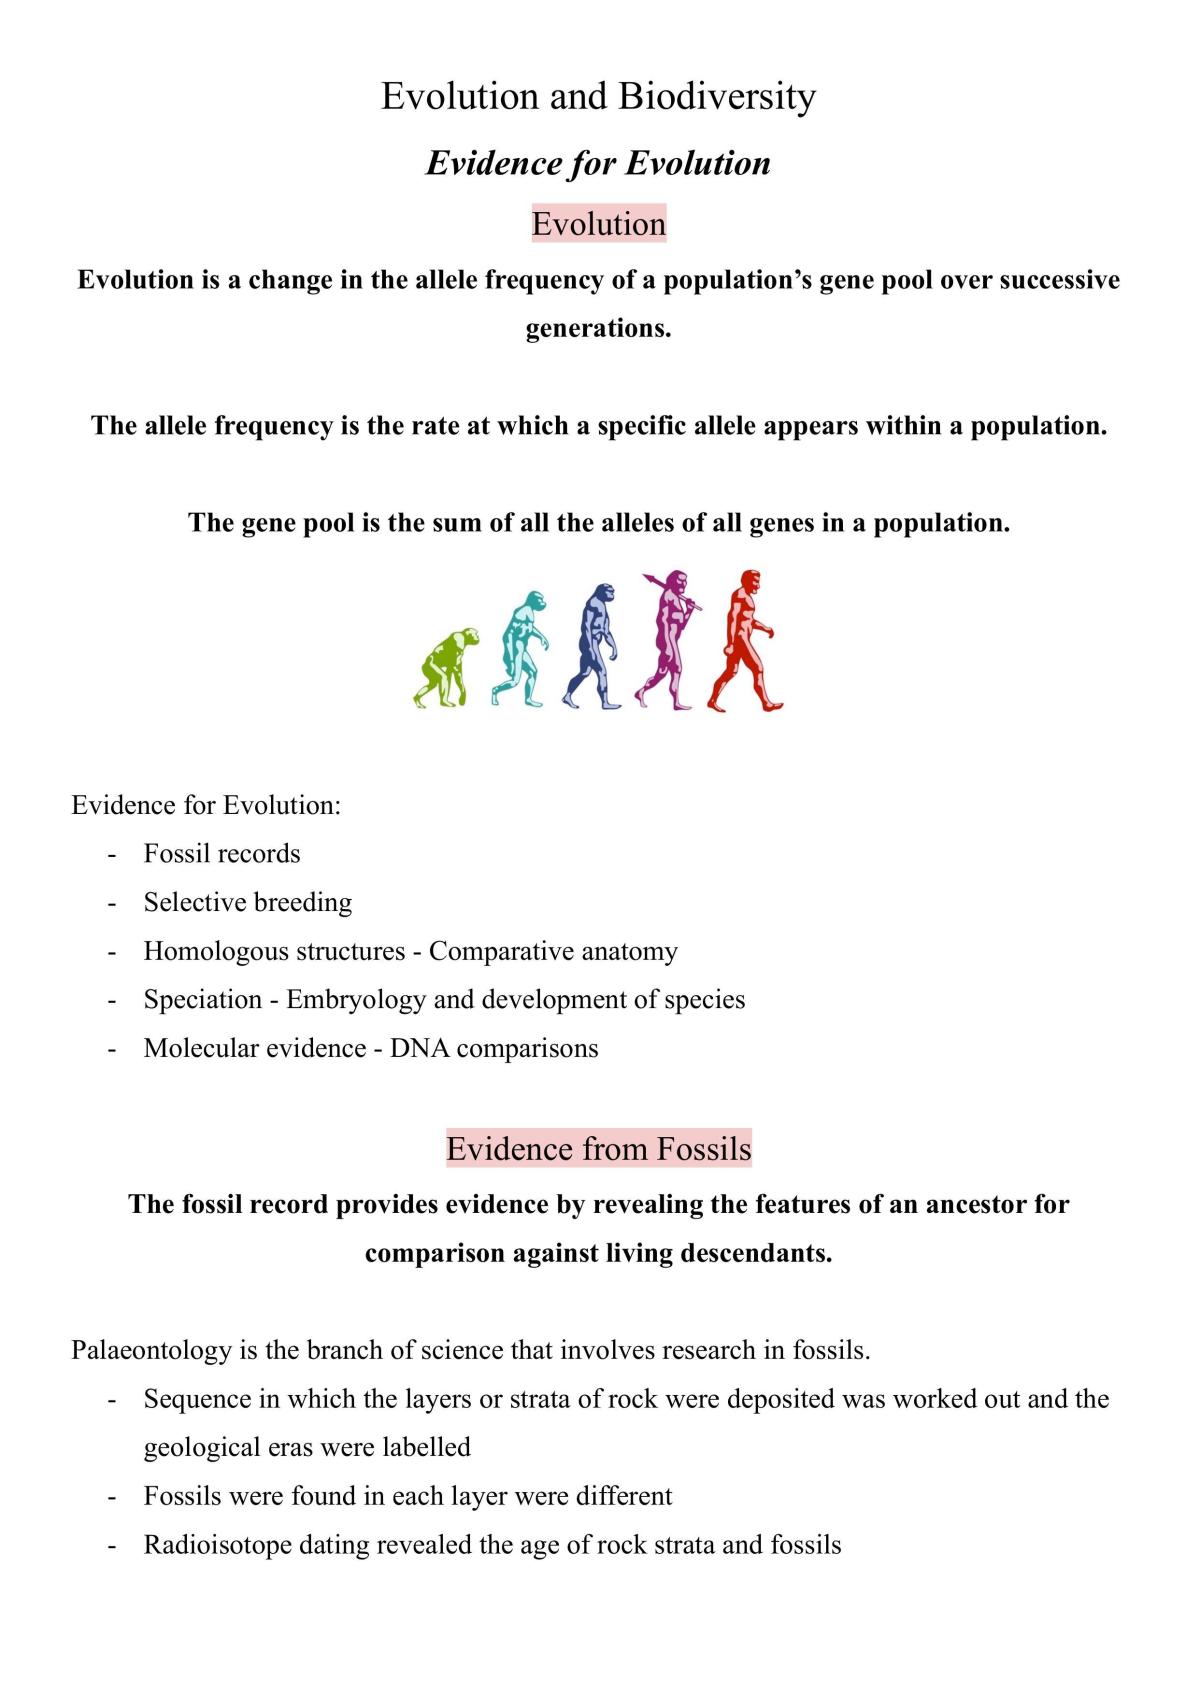 Evolution and Biodiversity Notes - Page 1